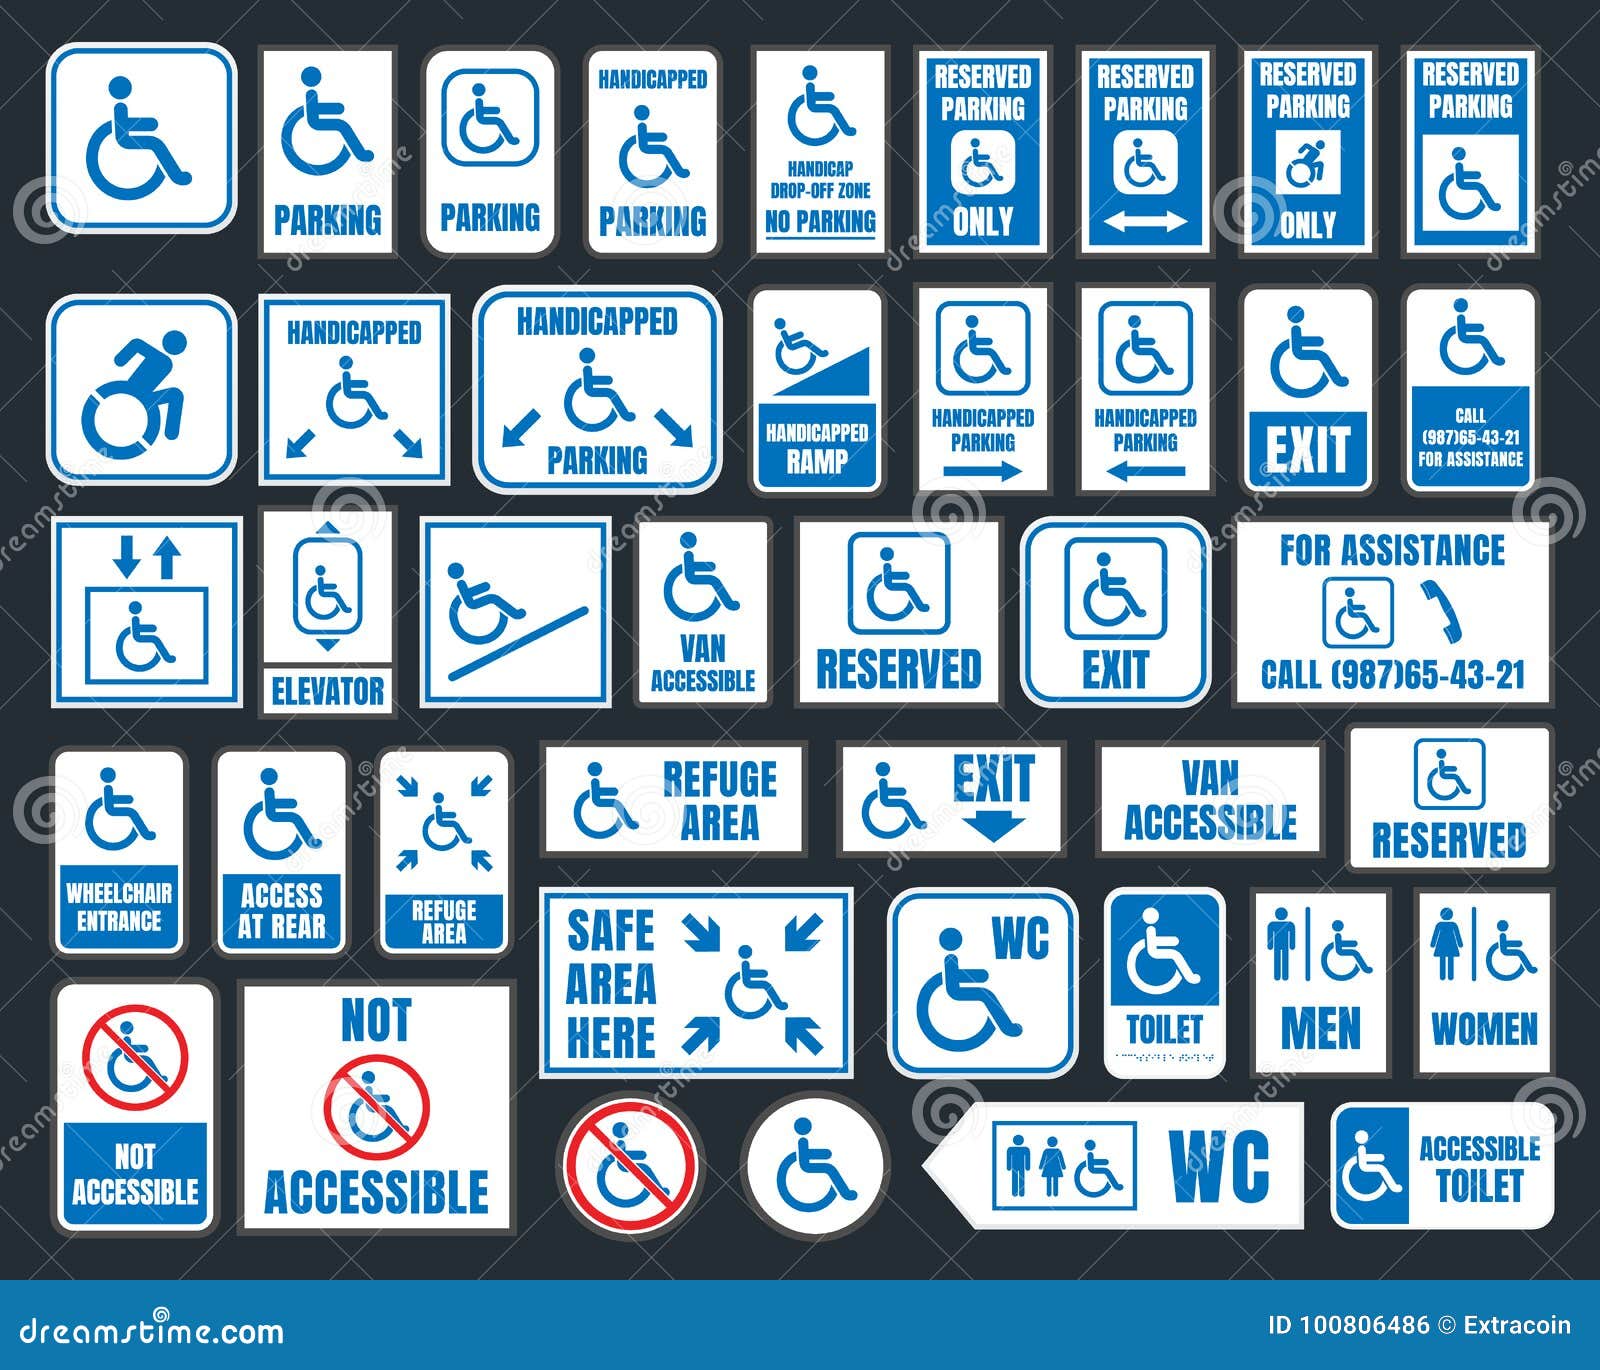 handicap icons, parking and toilet signs, disabled people